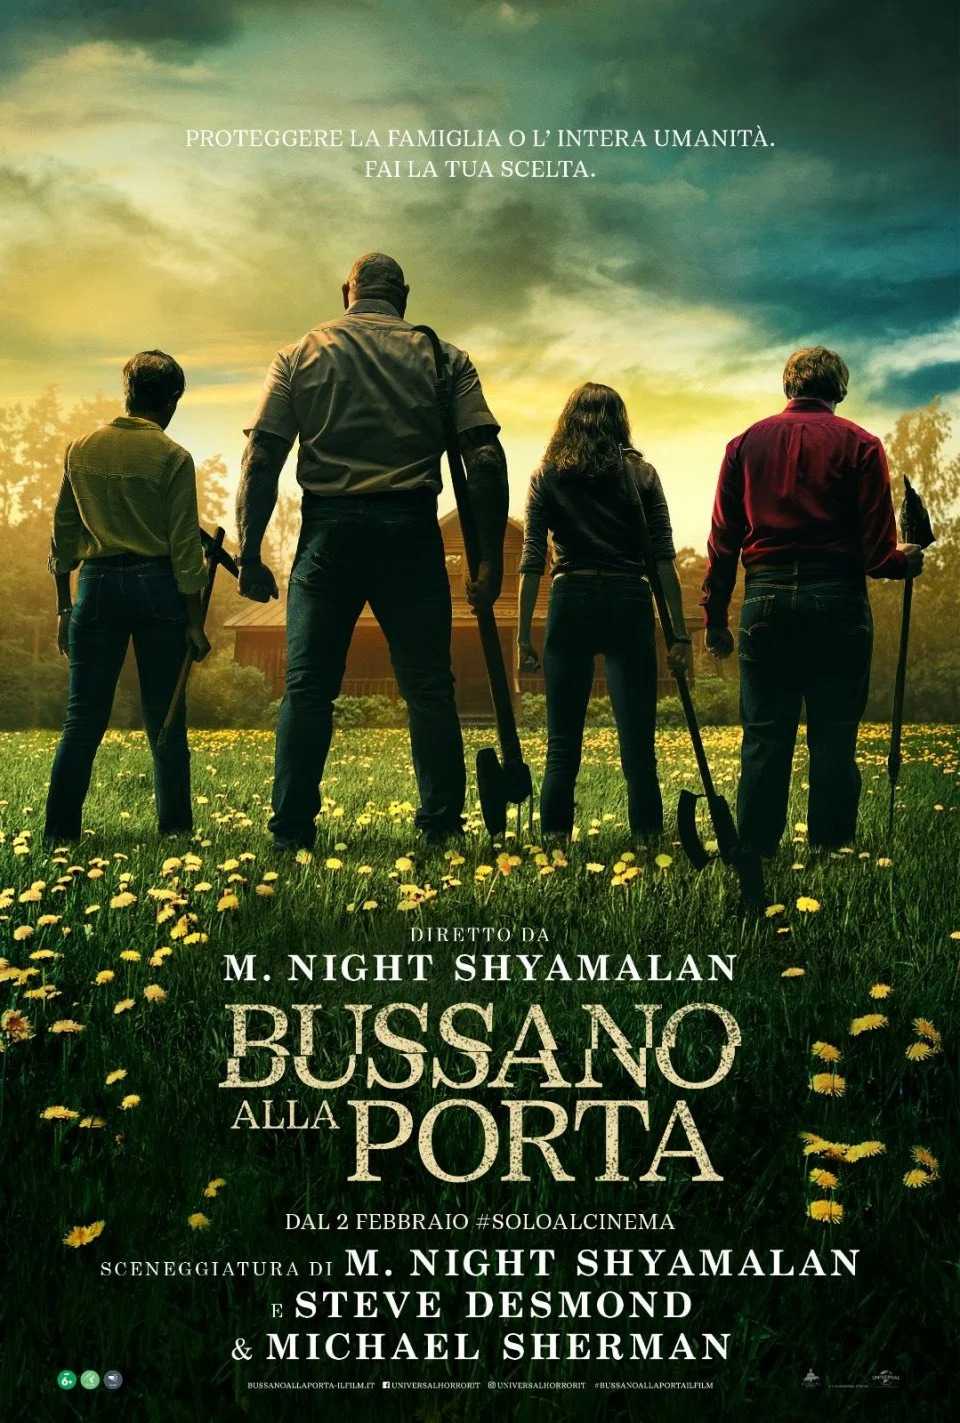 There's a Knock at the Door: M. Night Shyalaman film poster